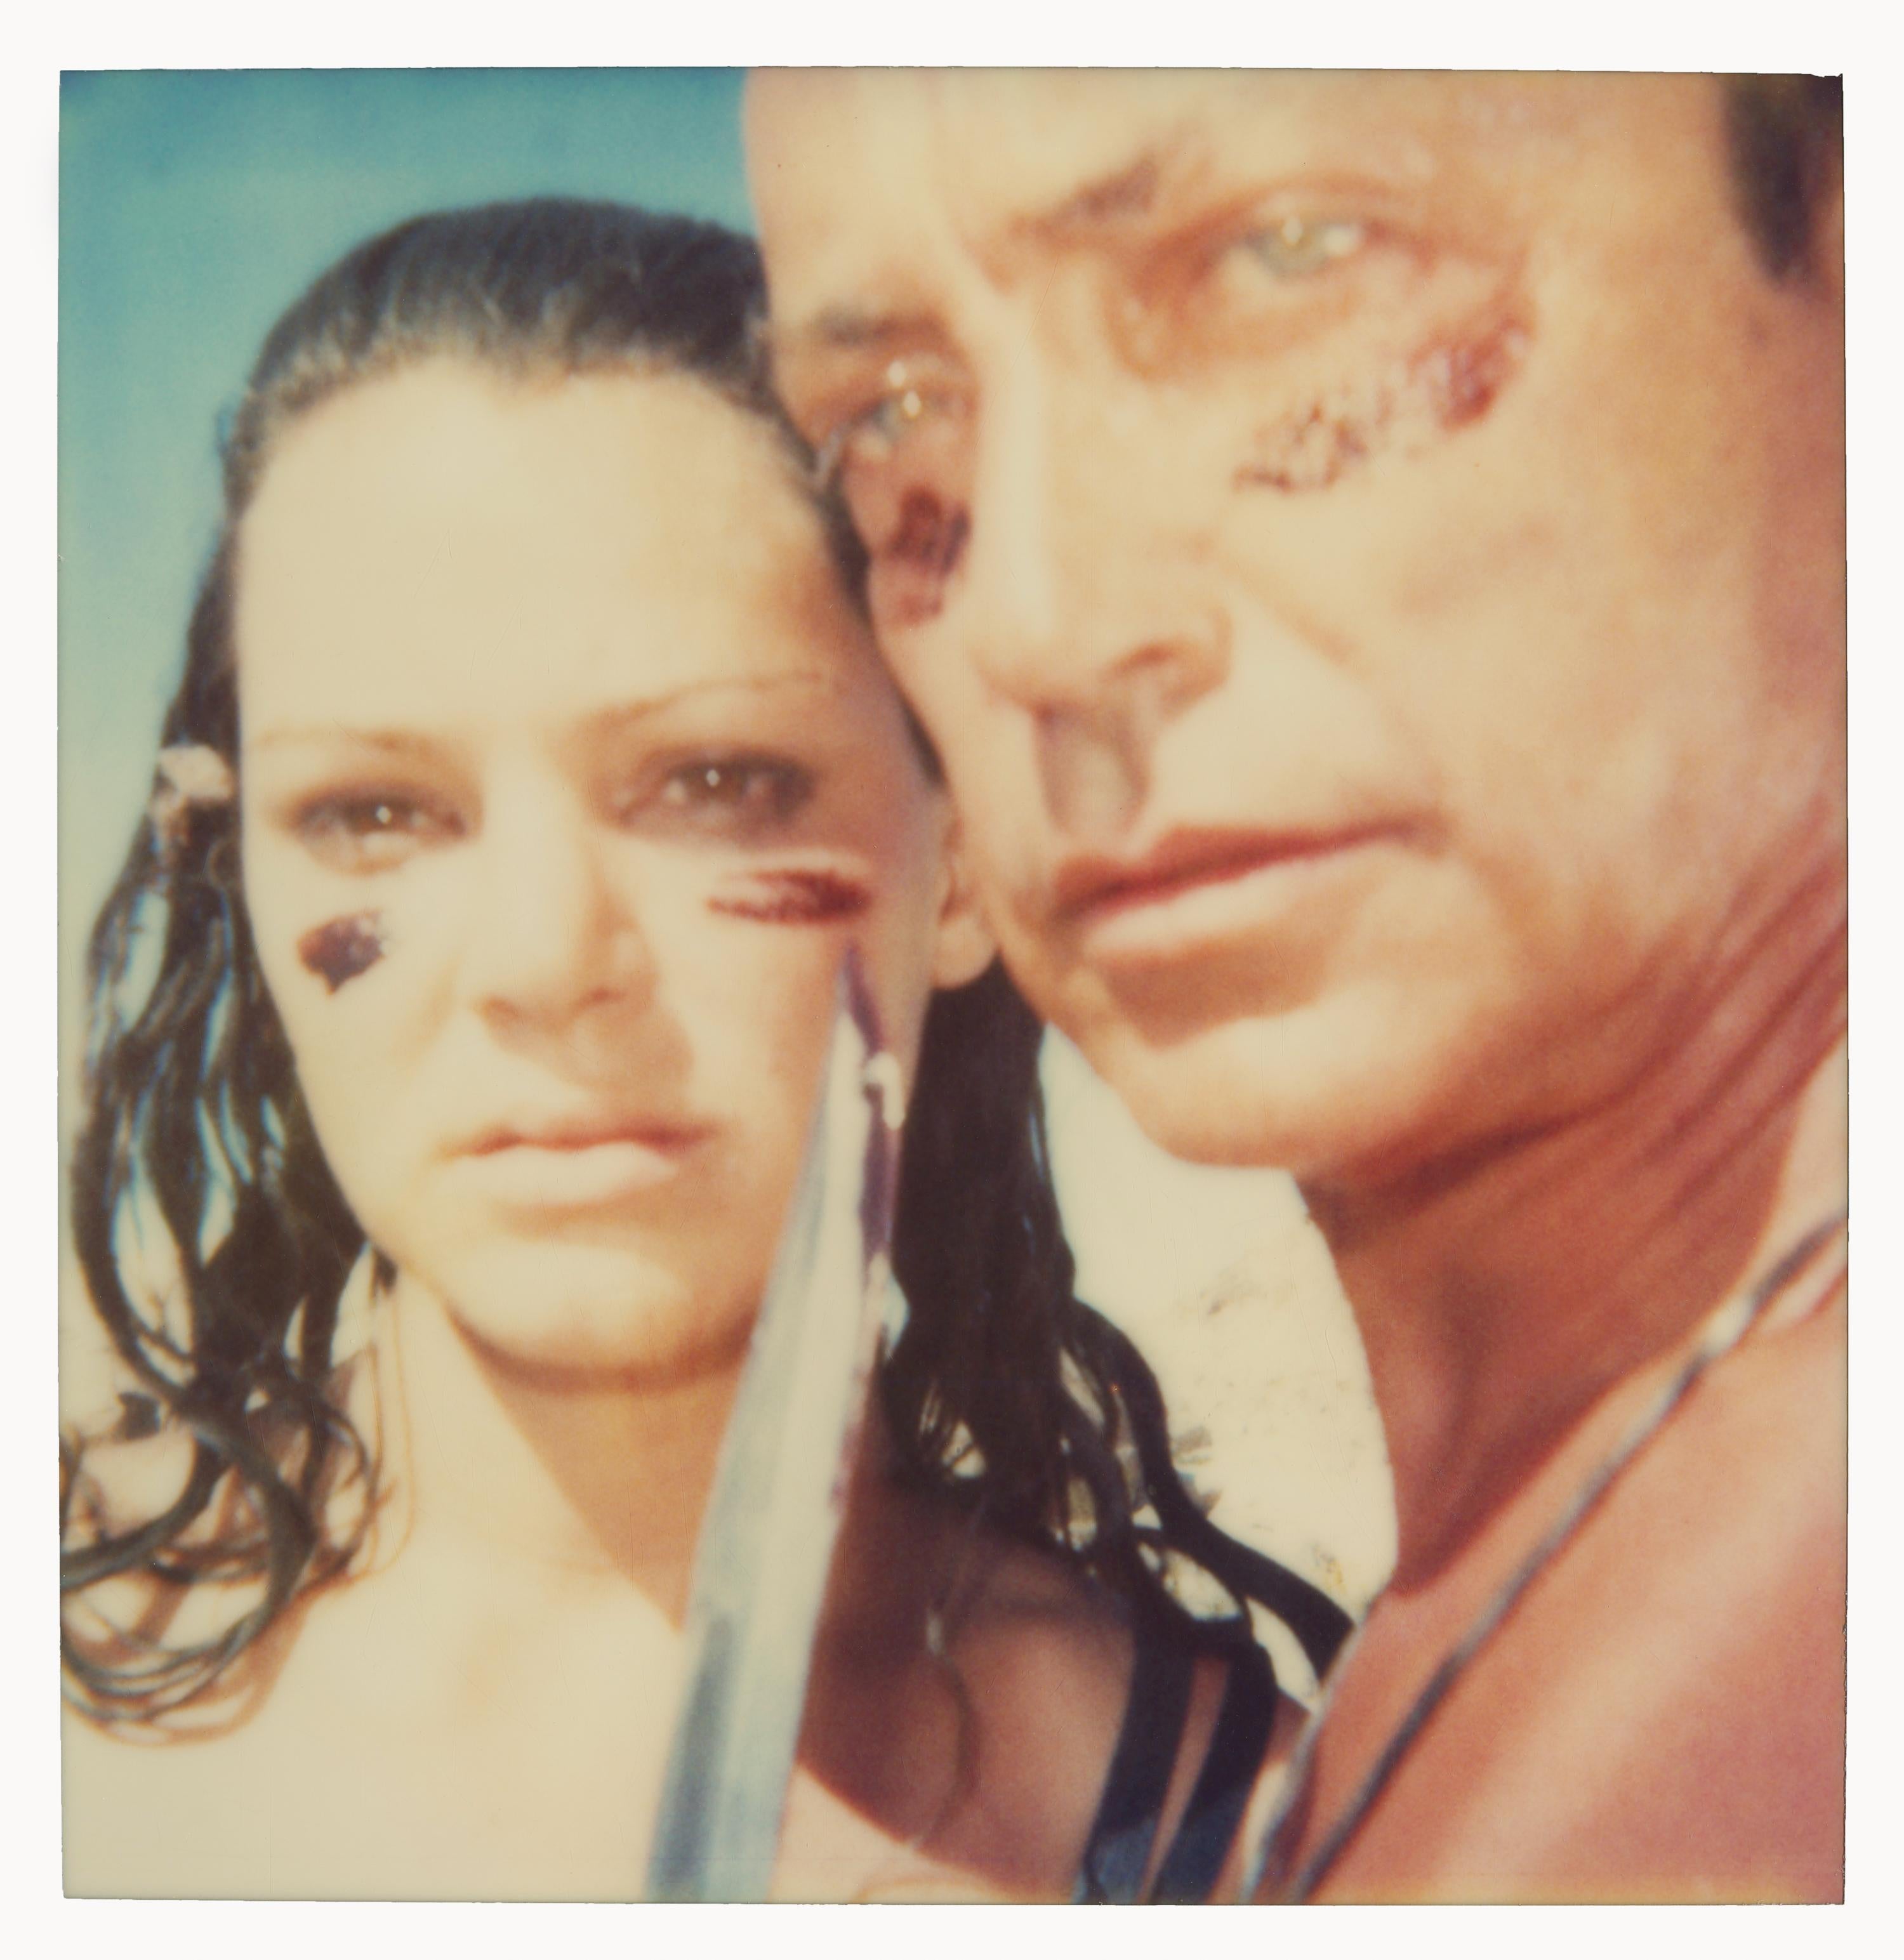 Stefanie Schneider Portrait Photograph - 'Penelope and Hans' from the movie Immaculate Springs - starring Udo Kier